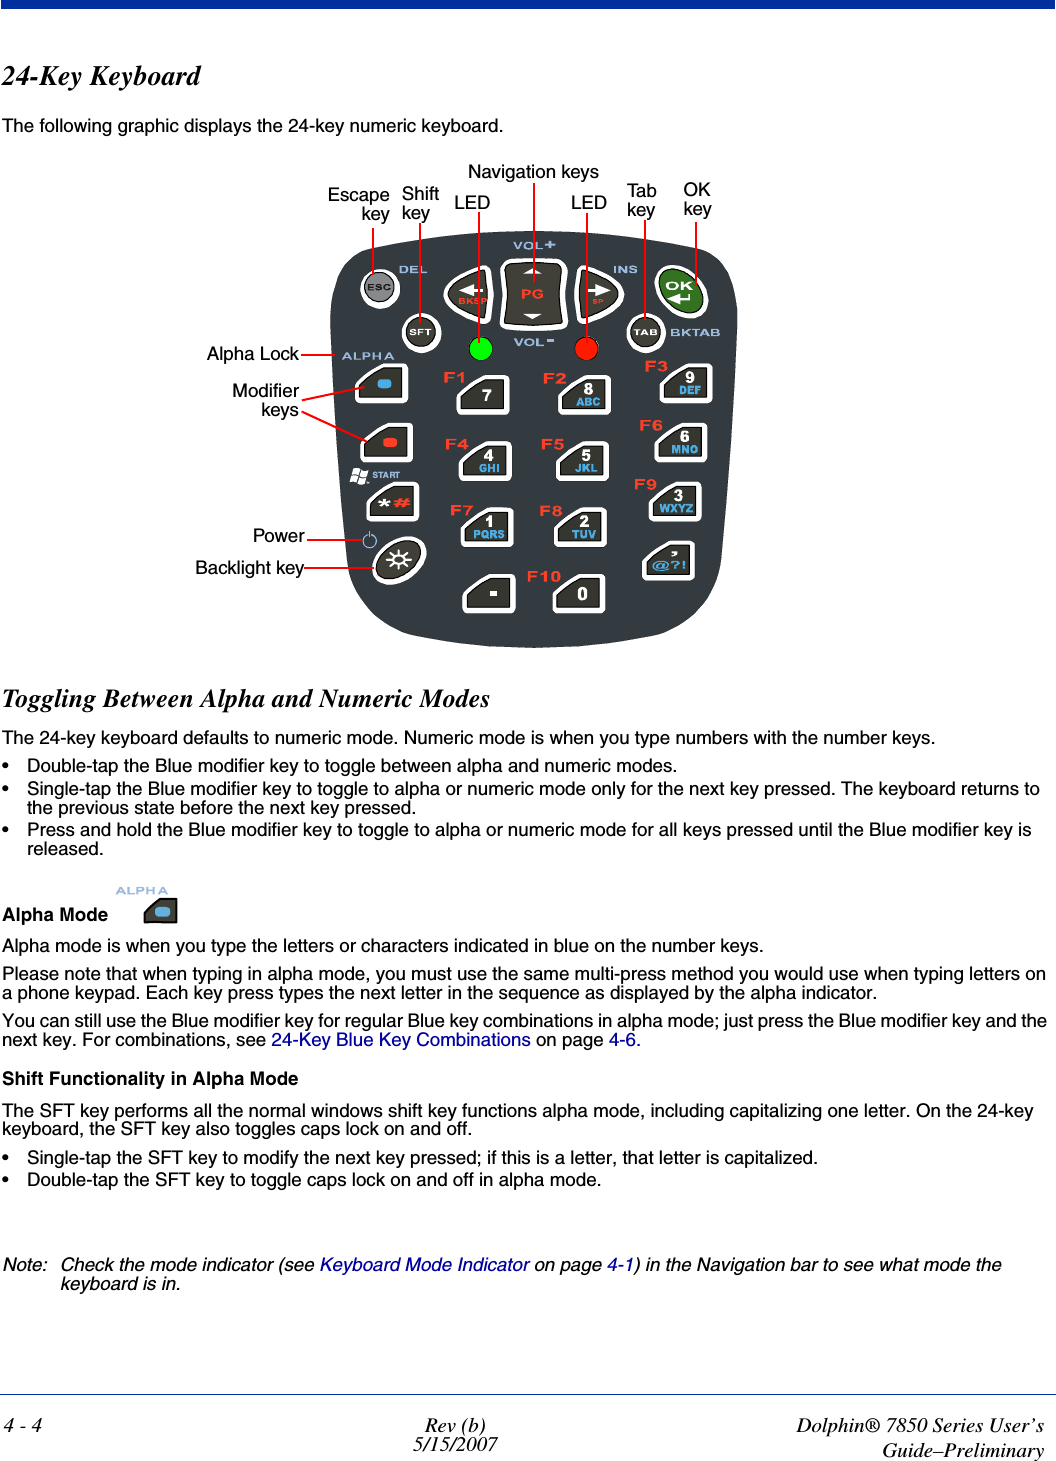 4 - 4 Rev (b)5/15/2007Dolphin® 7850 Series User’sGuide–Preliminary24-Key KeyboardThe following graphic displays the 24-key numeric keyboard.Toggling Between Alpha and Numeric ModesThe 24-key keyboard defaults to numeric mode. Numeric mode is when you type numbers with the number keys. • Double-tap the Blue modifier key to toggle between alpha and numeric modes.• Single-tap the Blue modifier key to toggle to alpha or numeric mode only for the next key pressed. The keyboard returns to the previous state before the next key pressed.• Press and hold the Blue modifier key to toggle to alpha or numeric mode for all keys pressed until the Blue modifier key is released.Alpha Mode Alpha mode is when you type the letters or characters indicated in blue on the number keys.Please note that when typing in alpha mode, you must use the same multi-press method you would use when typing letters on a phone keypad. Each key press types the next letter in the sequence as displayed by the alpha indicator.You can still use the Blue modifier key for regular Blue key combinations in alpha mode; just press the Blue modifier key and the next key. For combinations, see 24-Key Blue Key Combinations on page 4-6. Shift Functionality in Alpha ModeThe SFT key performs all the normal windows shift key functions alpha mode, including capitalizing one letter. On the 24-key keyboard, the SFT key also toggles caps lock on and off.• Single-tap the SFT key to modify the next key pressed; if this is a letter, that letter is capitalized.• Double-tap the SFT key to toggle caps lock on and off in alpha mode.Note: Check the mode indicator (see Keyboard Mode Indicator on page 4-1) in the Navigation bar to see what mode the keyboard is in.STARTPowerBacklight keyModifierkeysAlpha LockEscapekeyOK keyNavigation keysTab keyShift key LED LED